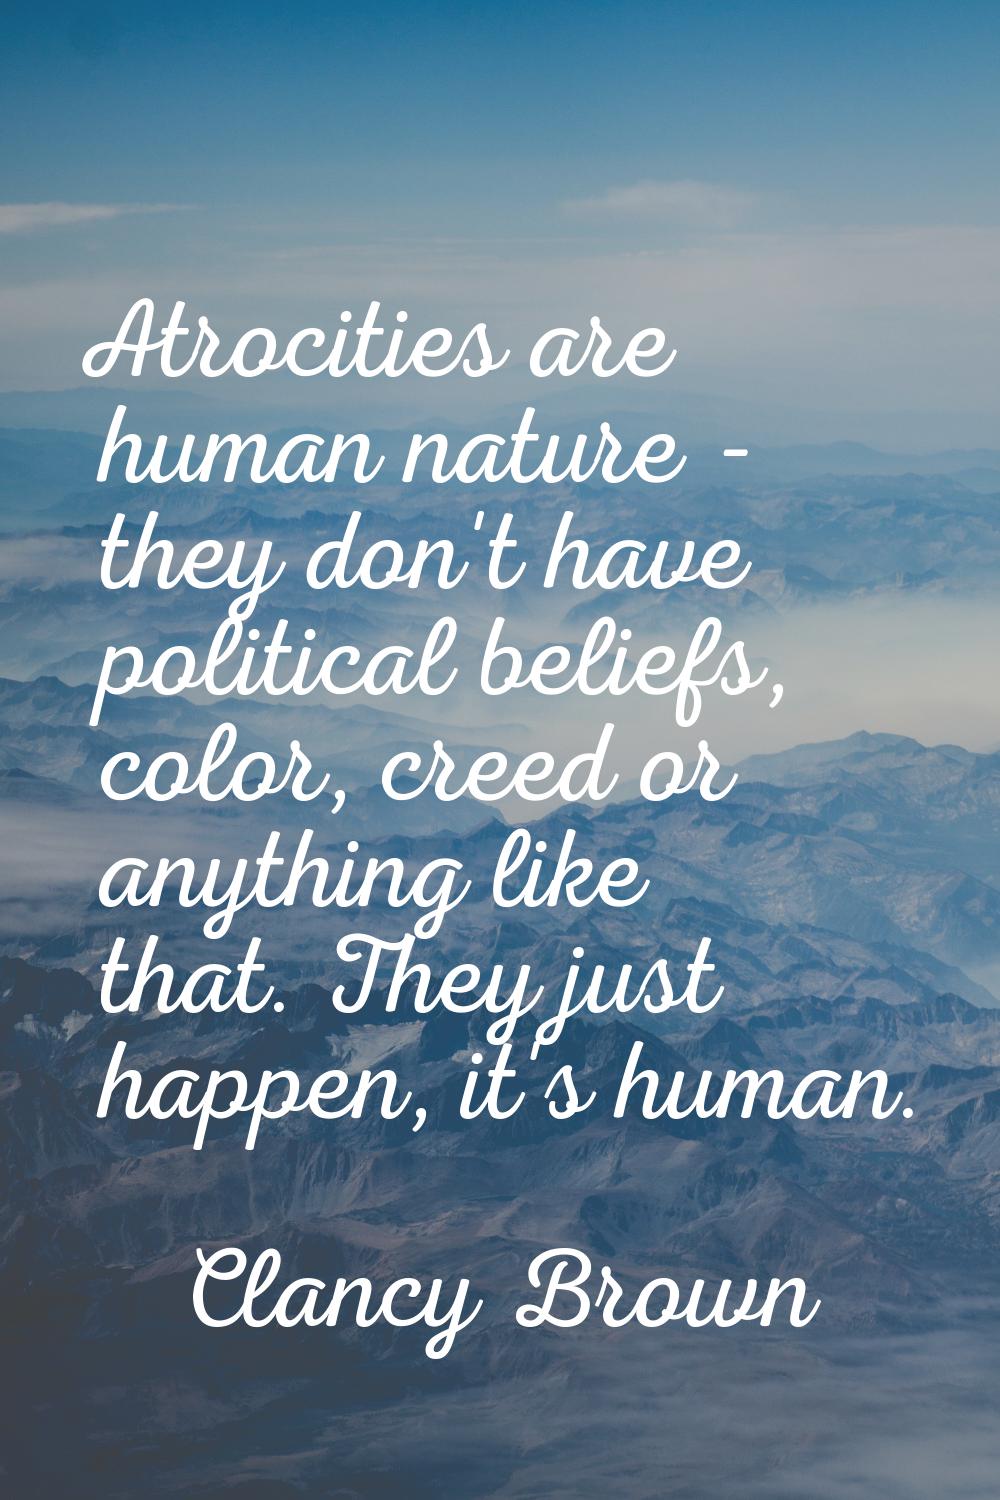 Atrocities are human nature - they don't have political beliefs, color, creed or anything like that